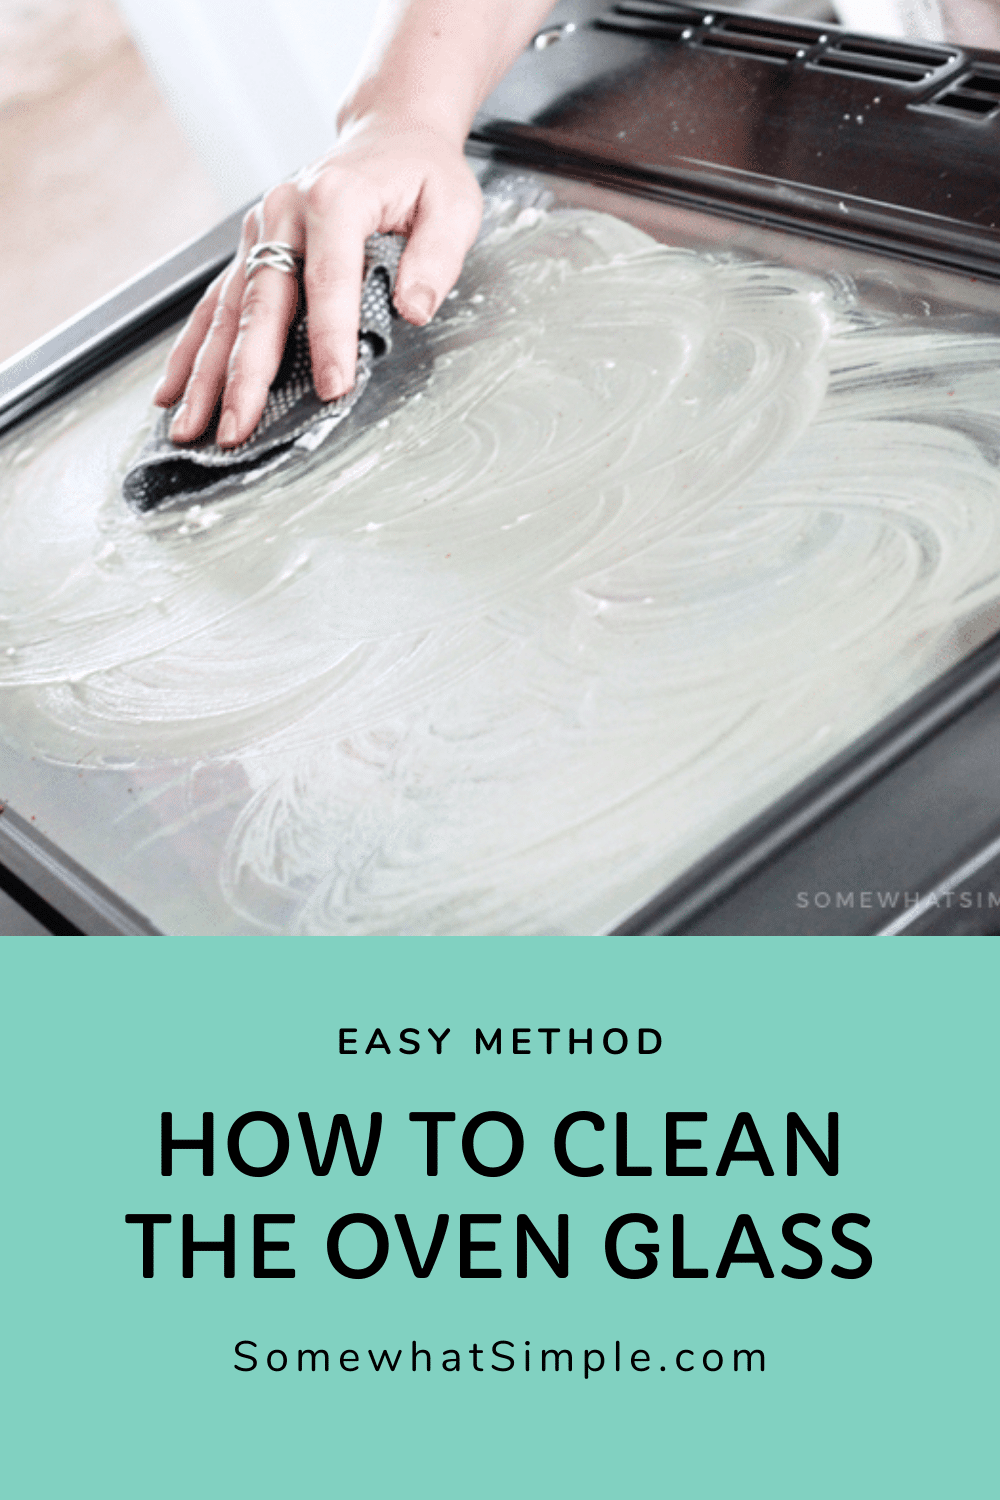 Cleaning the oven is no fun, but it's even less fun when your cleaning method is ineffective. Follow our step-by-step guide to clean your oven quickly and thoroughly, with no expensive products required. via @somewhatsimple